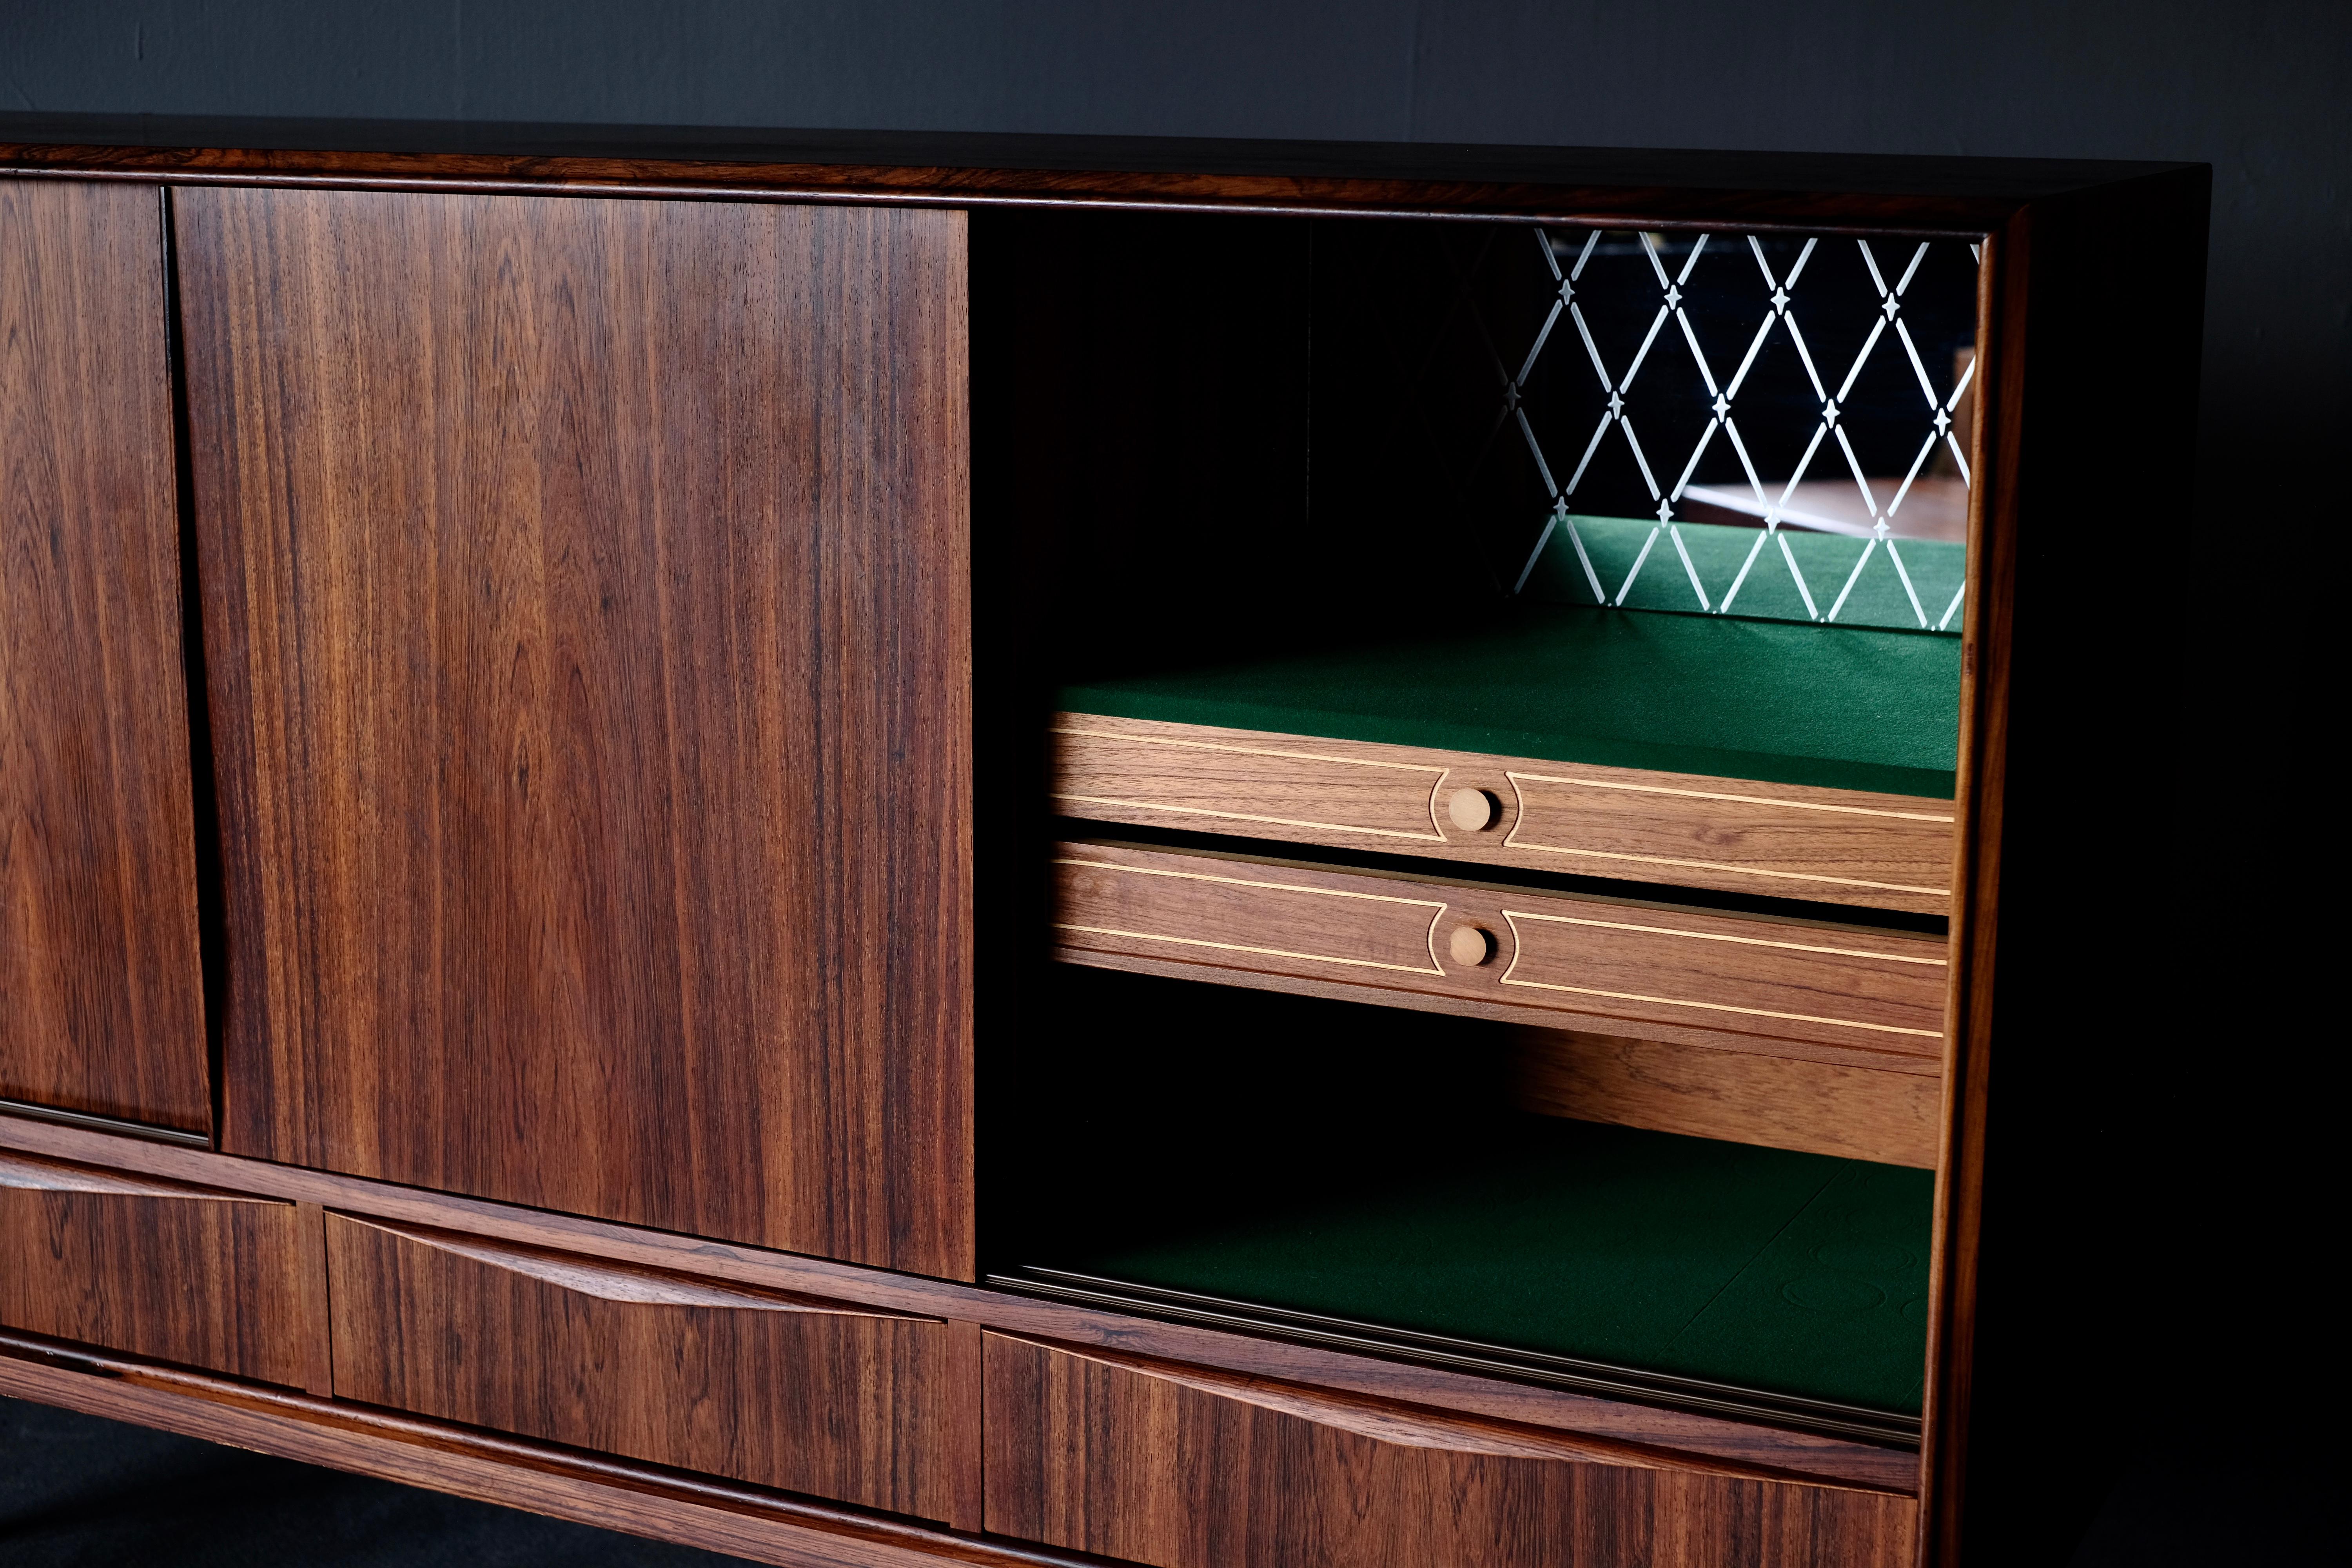 Sideboard in rosewood. It has front sliding doors and 4 drawers. The sliding doors open to house felt lined drawers and shelves. The details like the tapered legs and the elegant drawer pulls are distinctive in 1960s pieces such as this.